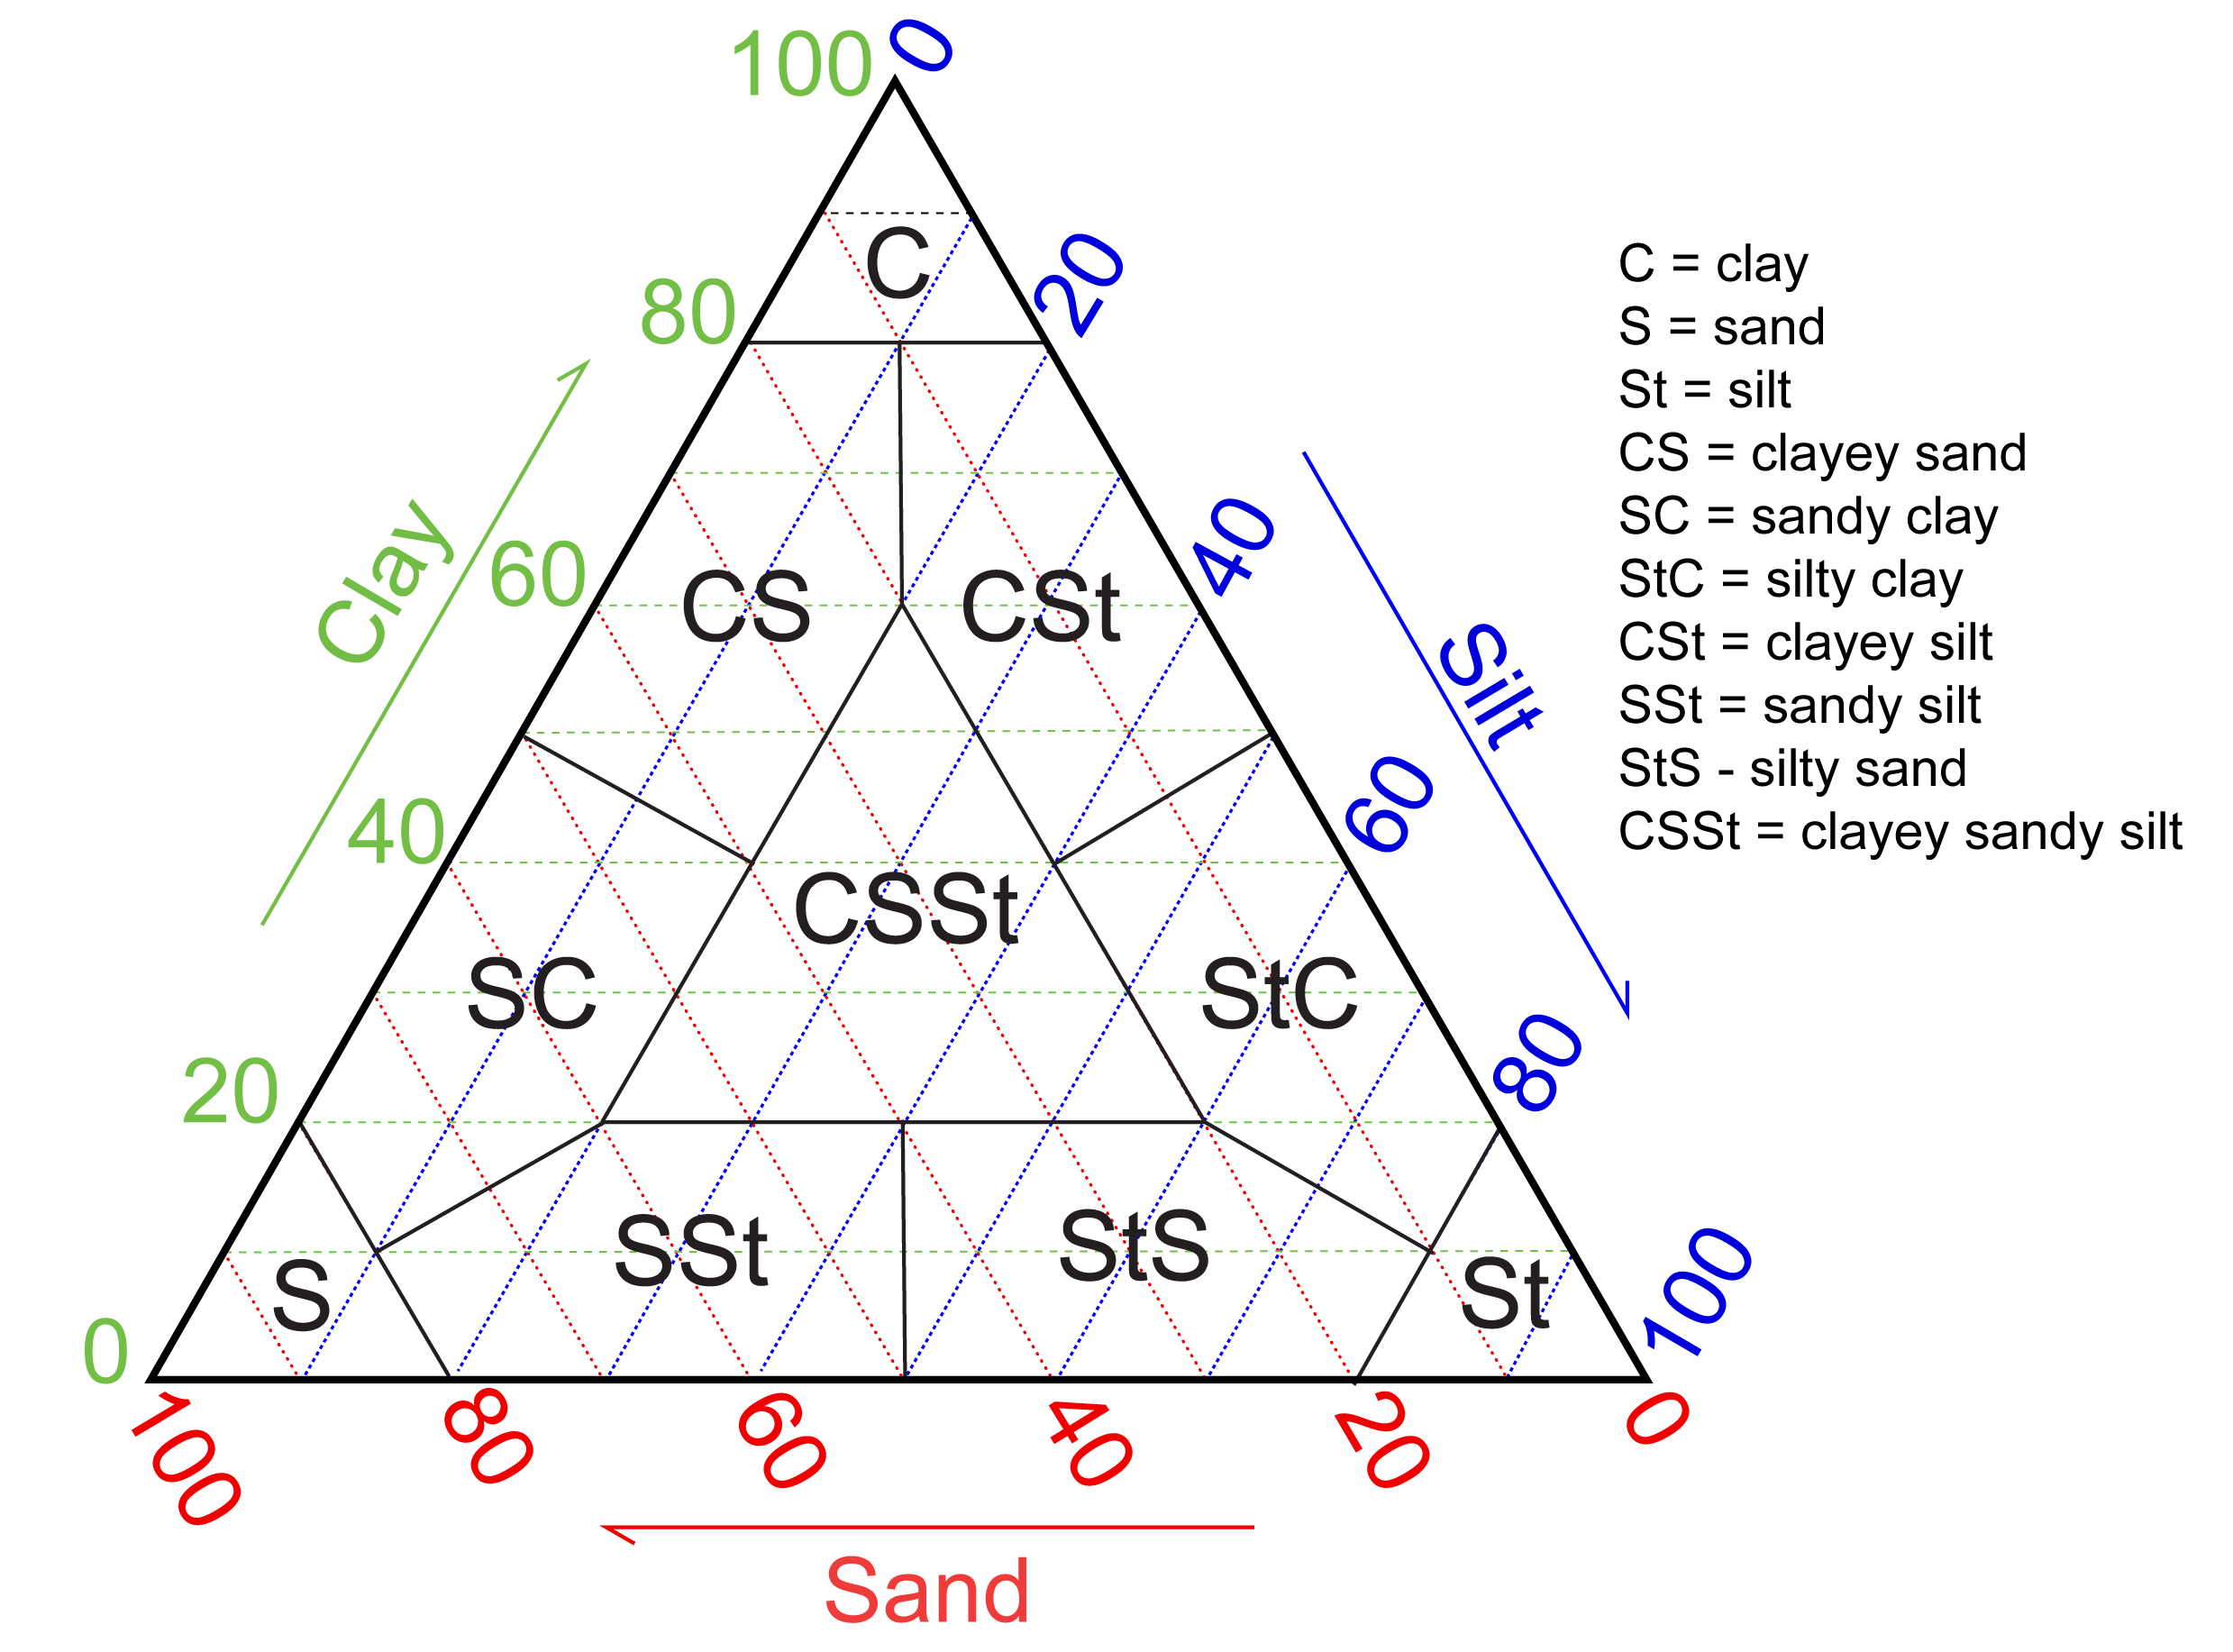 Triangular plot for sedimentary rocks with proportions of clay, silt, and sand.